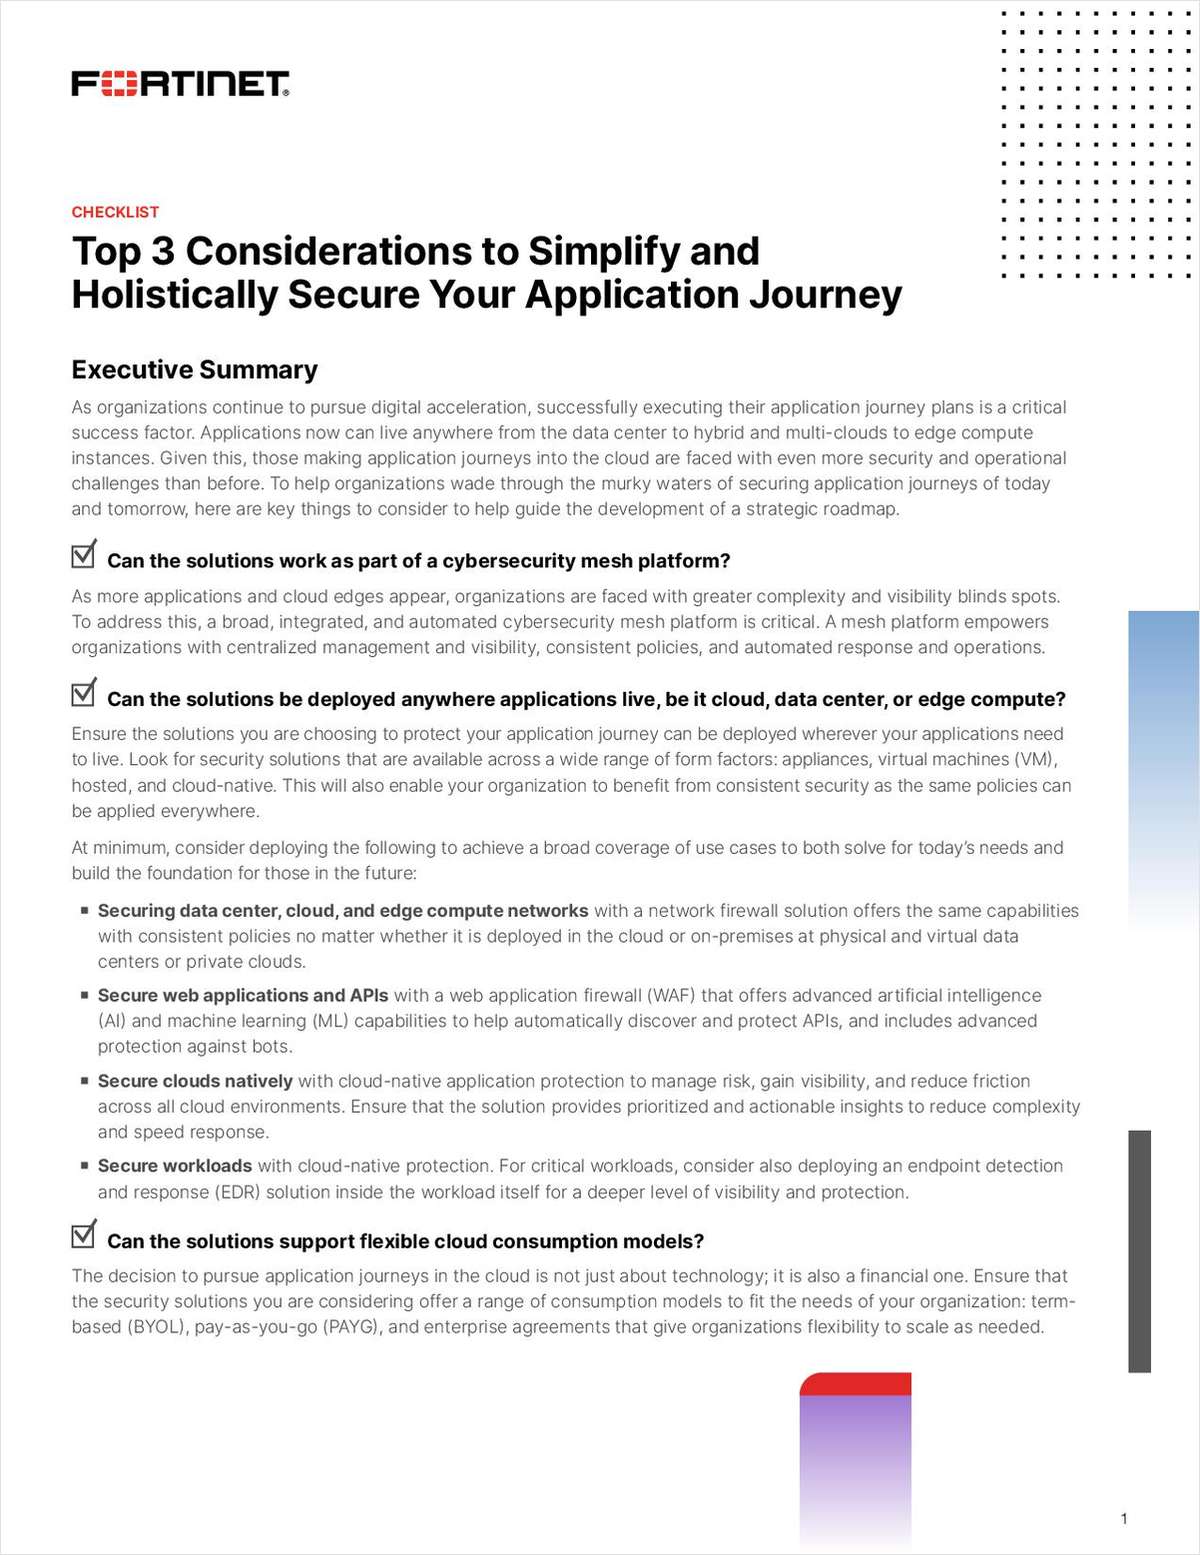 Checklist: Top 3 Considerations to Simplify and Holistically Secure Your Application Journey